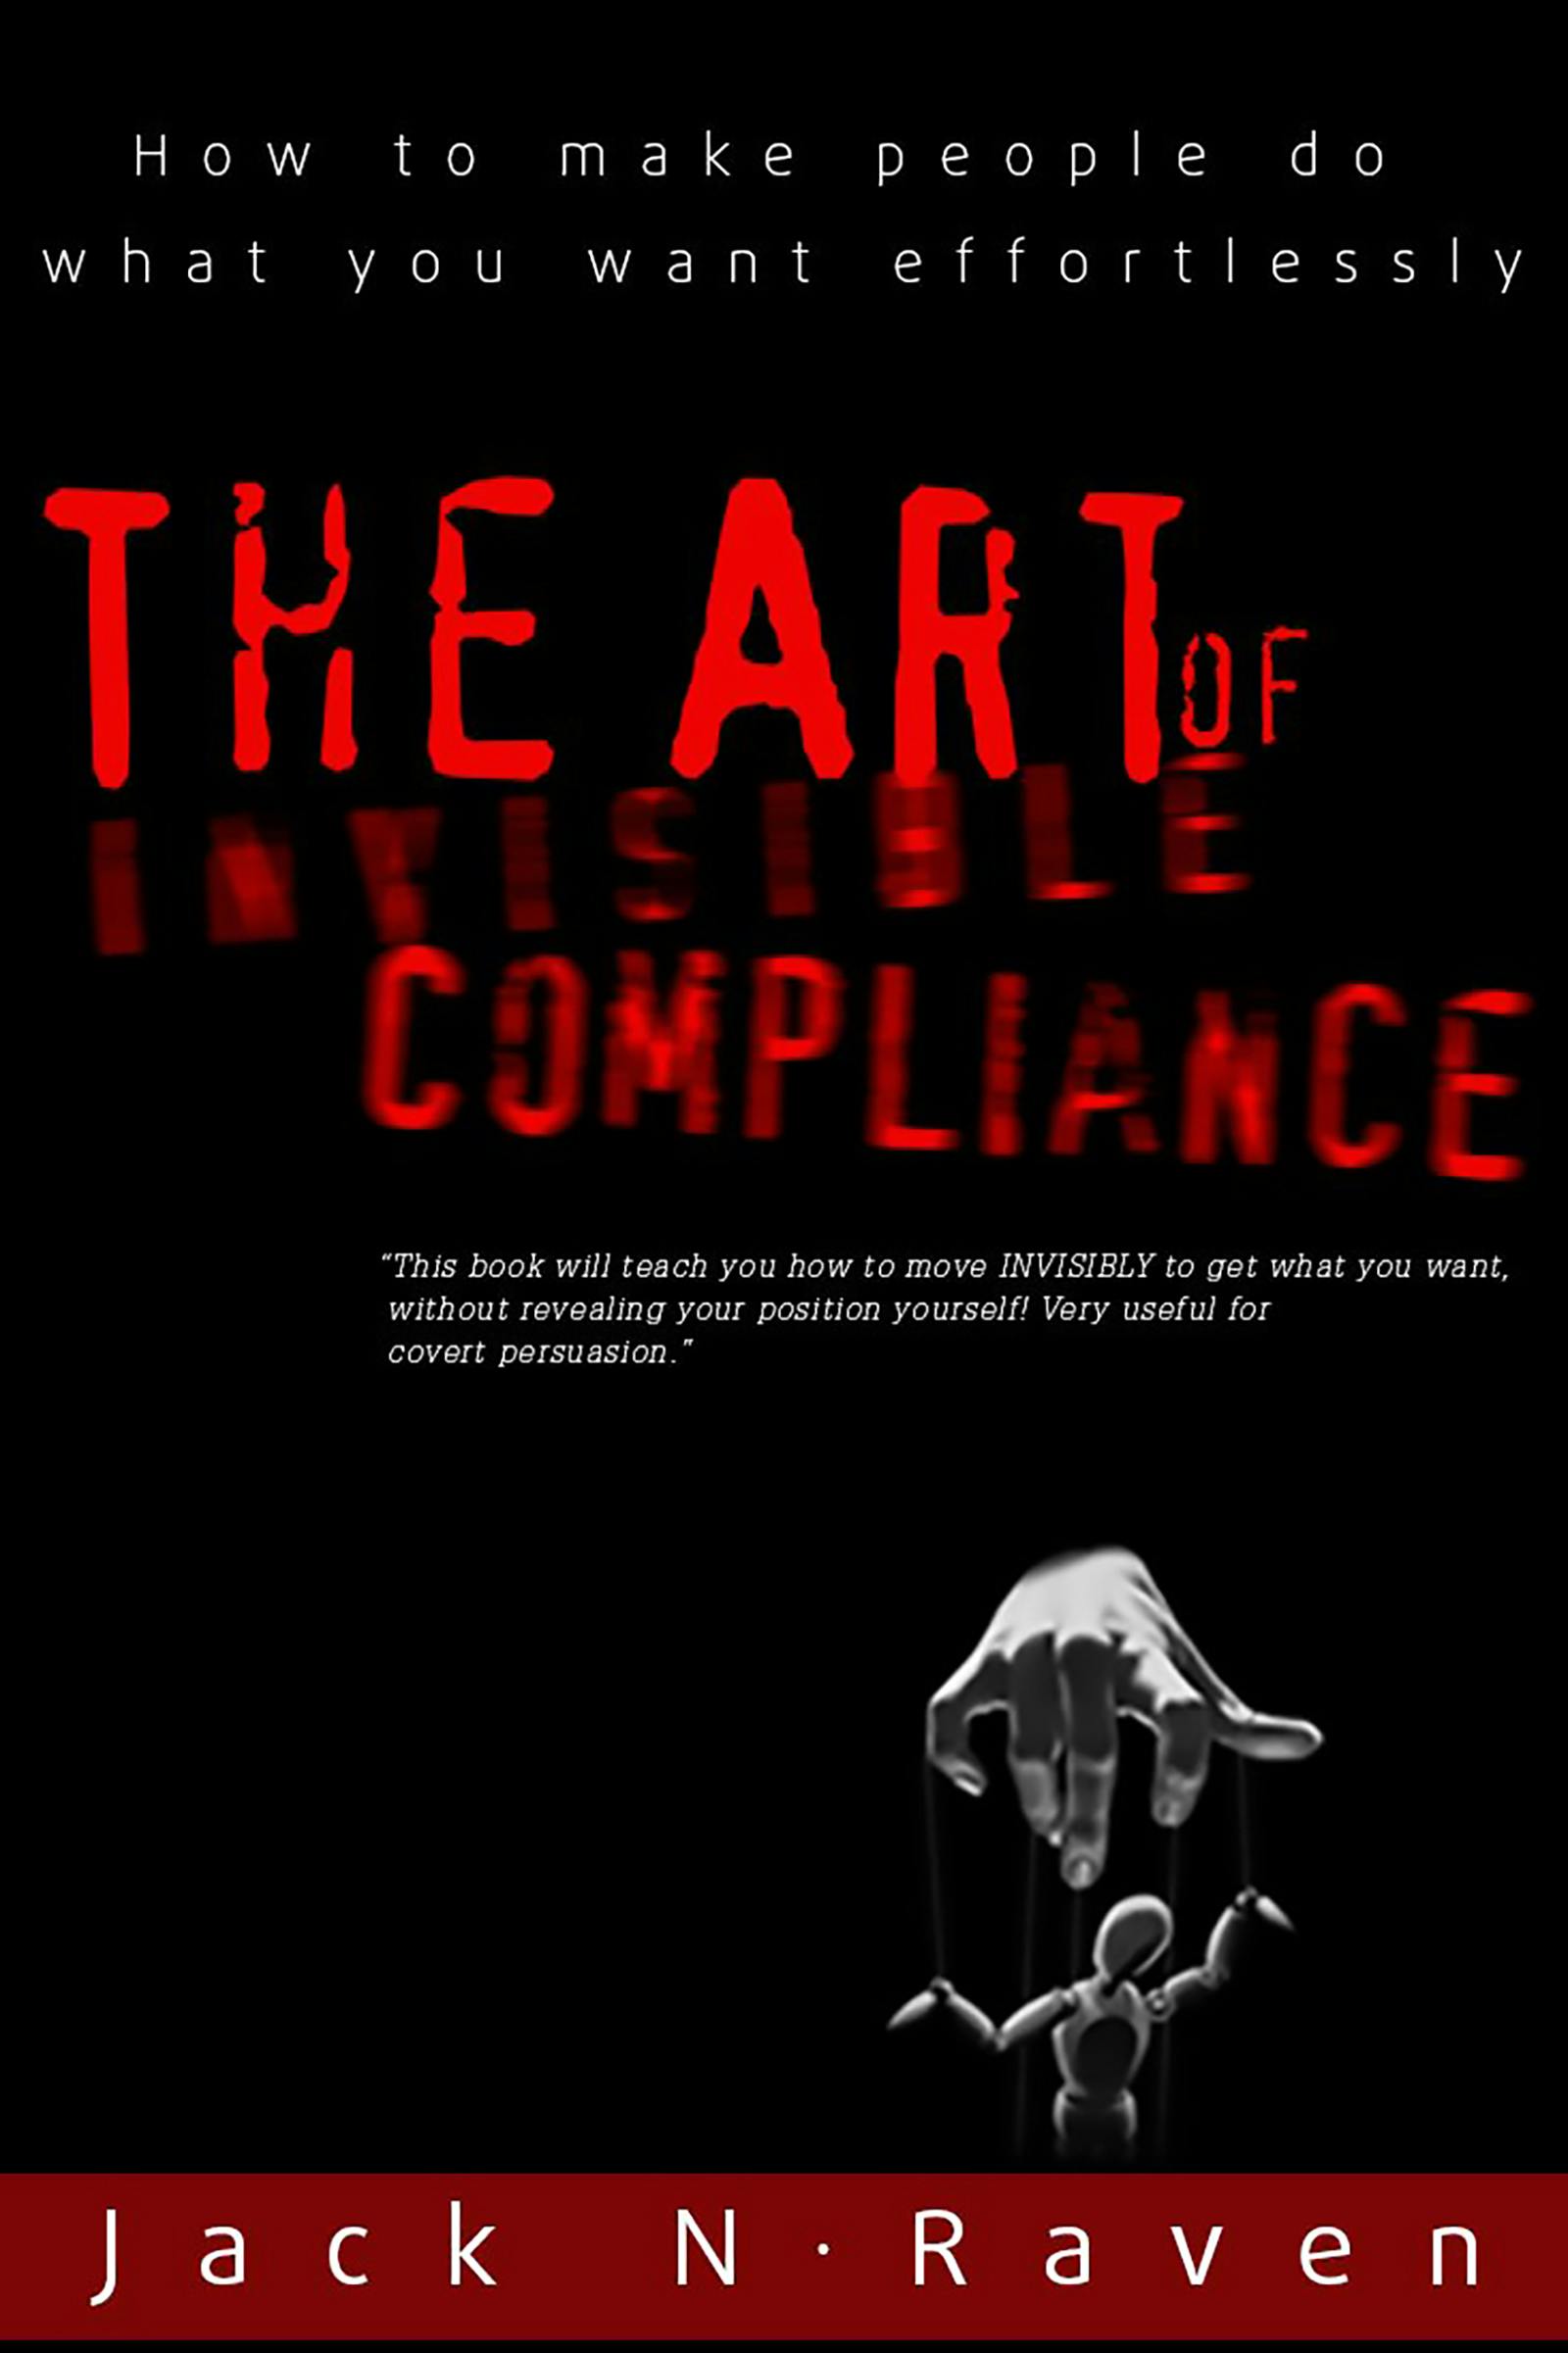 The Art of Invisible Compliance - How To Make People Do What You Want Effortlessly - Jack N. Raven